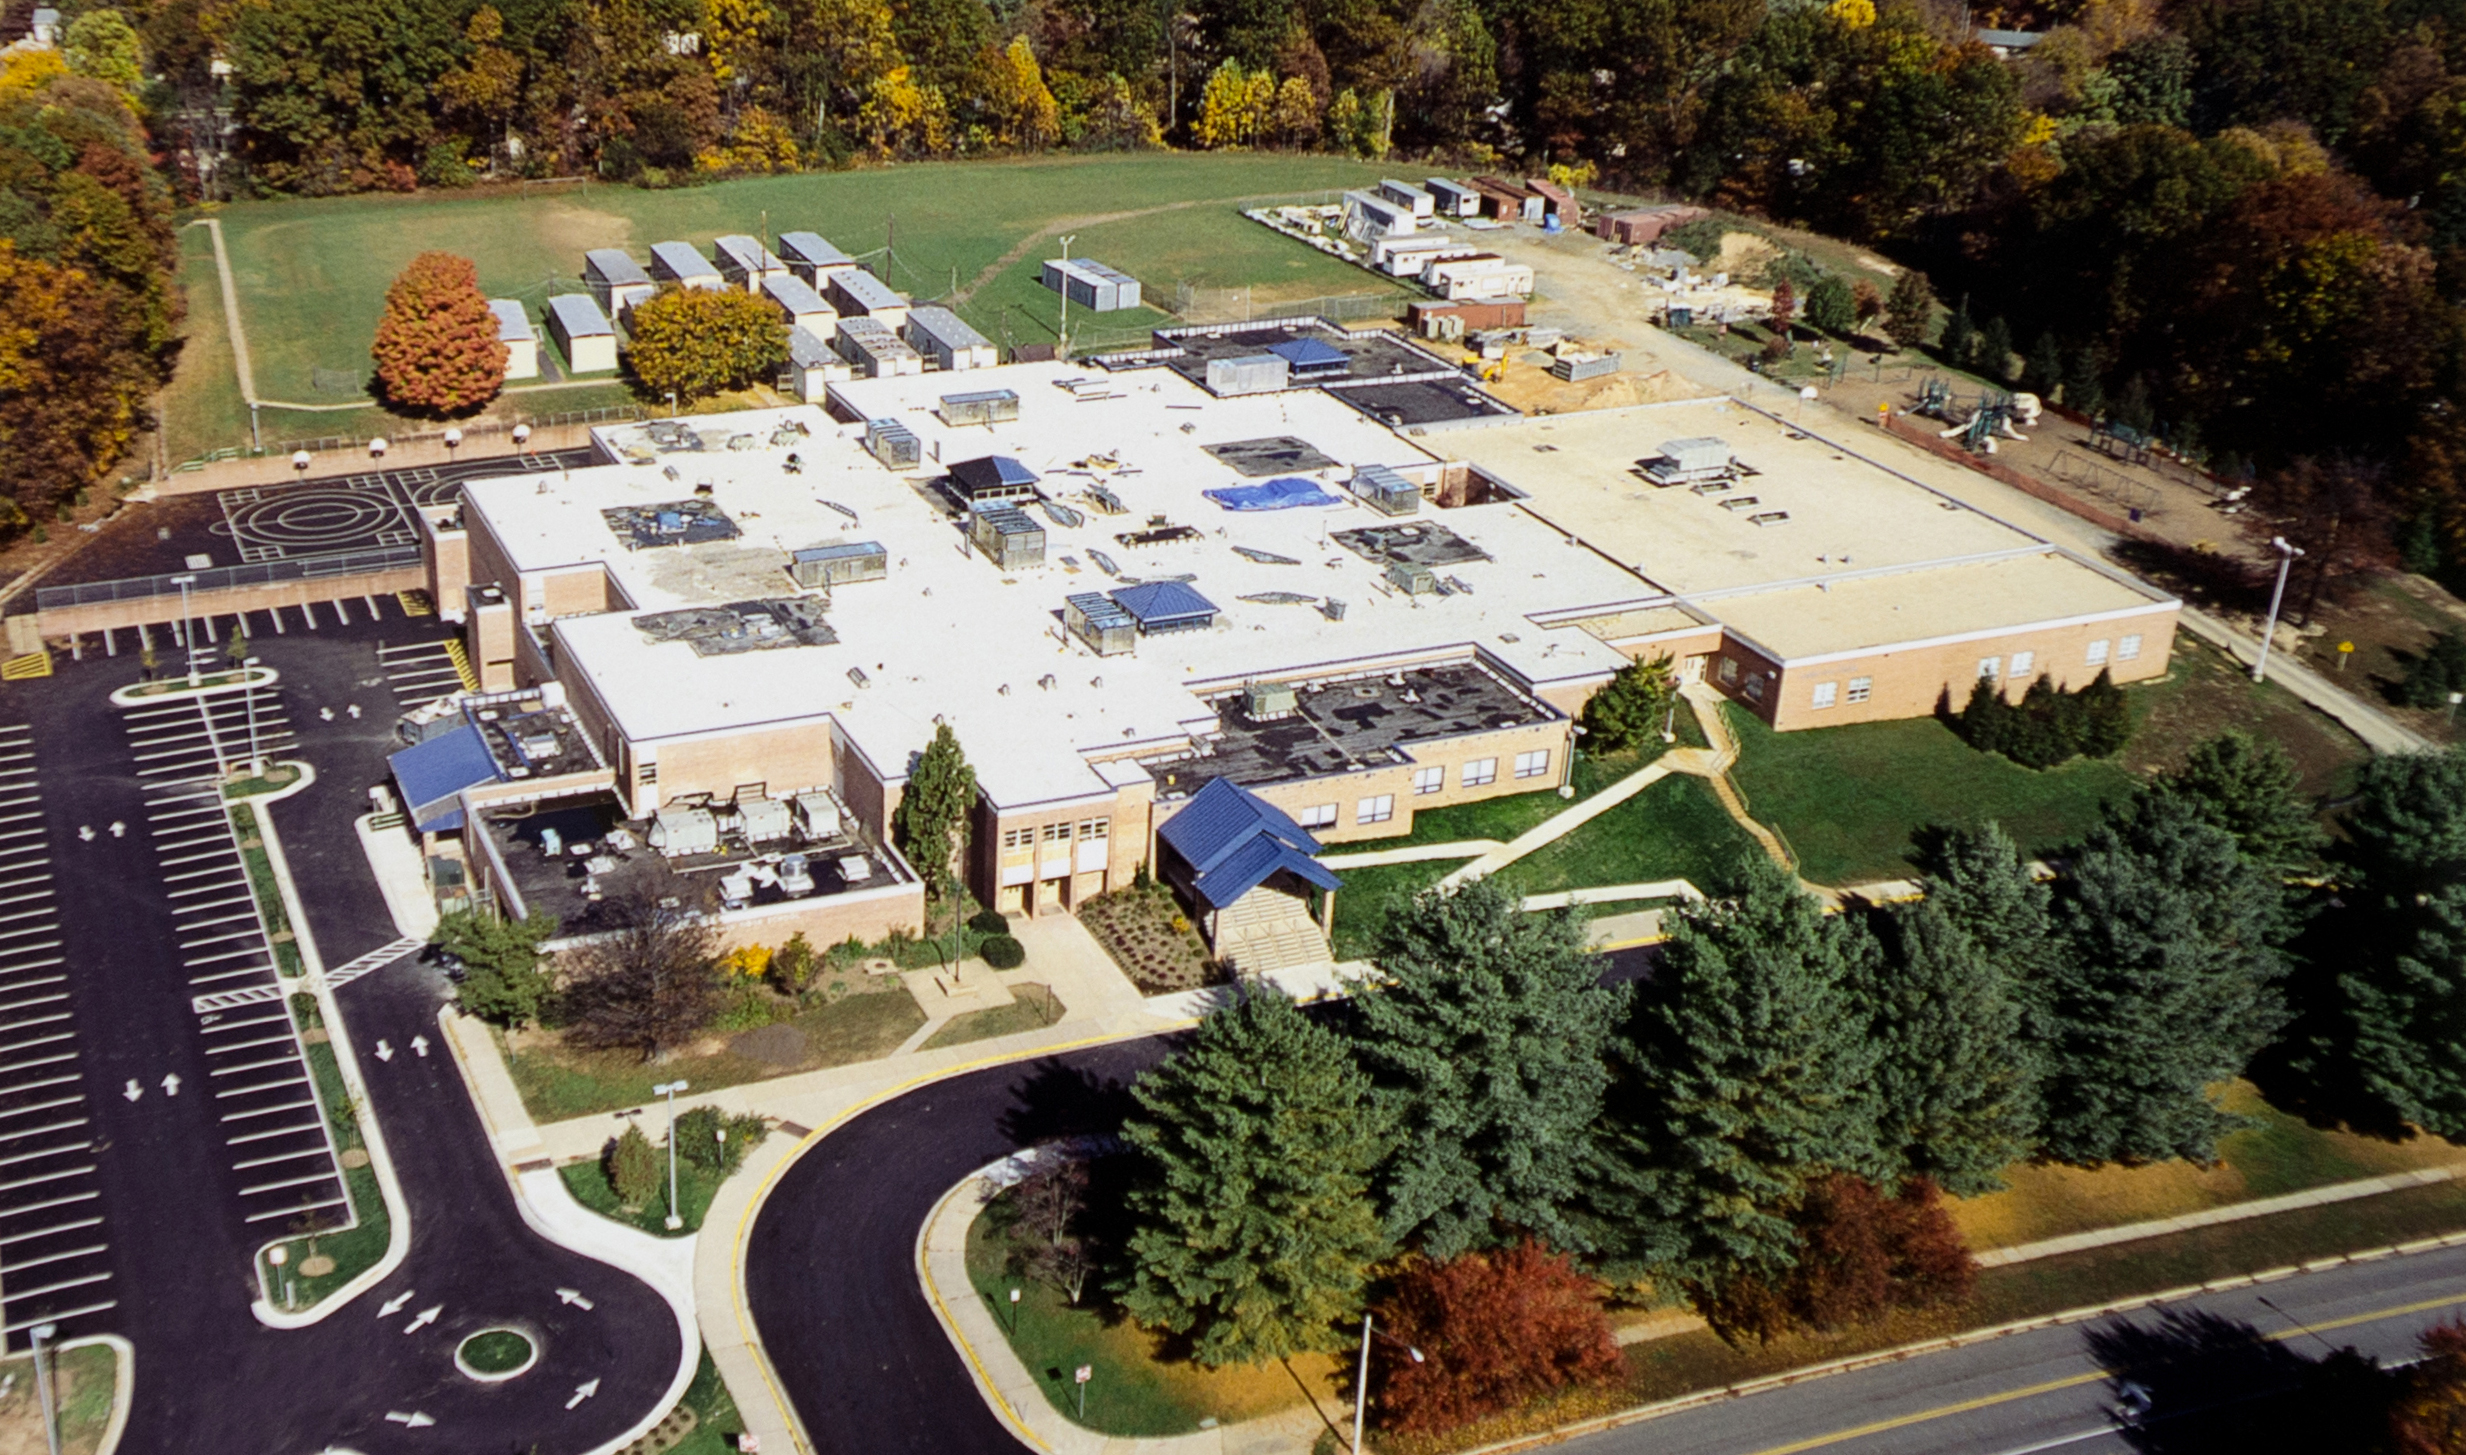 Aerial photograph of Laurel Ridge Elementary School, taken in October 2004. The photograph, taken from the front of the building, shows thirteen mobile classrooms situated behind the school on the playing field. Construction equipment is visible on the far right rear of the building where work is still underway. 